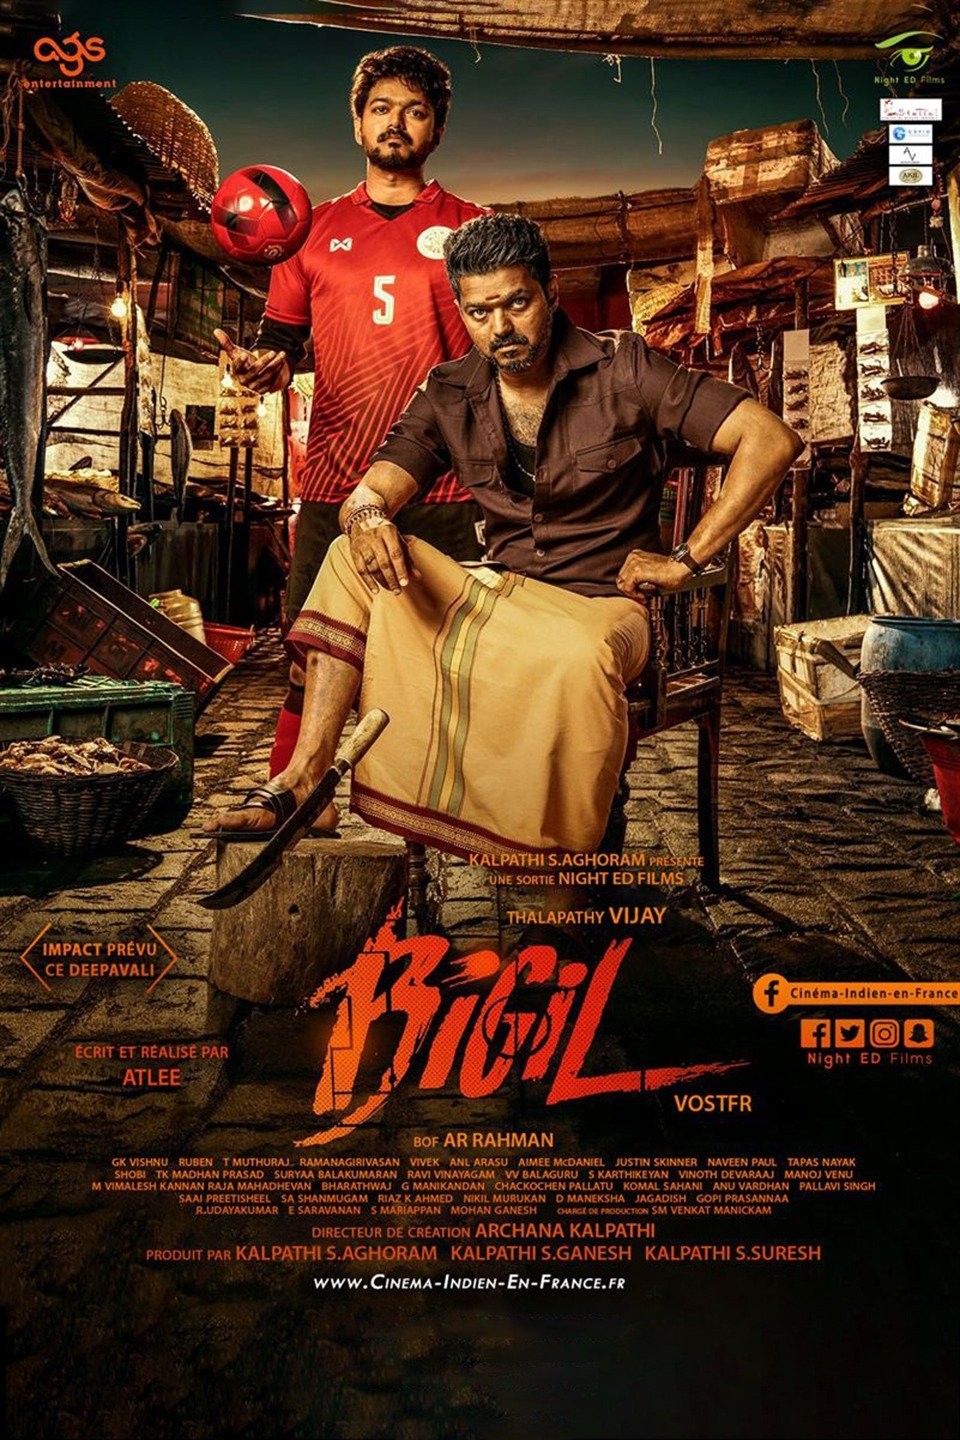 Bigil Movie: Review, Cast, Box Office, Budget, Story, Trailer, Music of  Thalapathy Vijay-Nayanthara's Film | 🎥 LatestLY